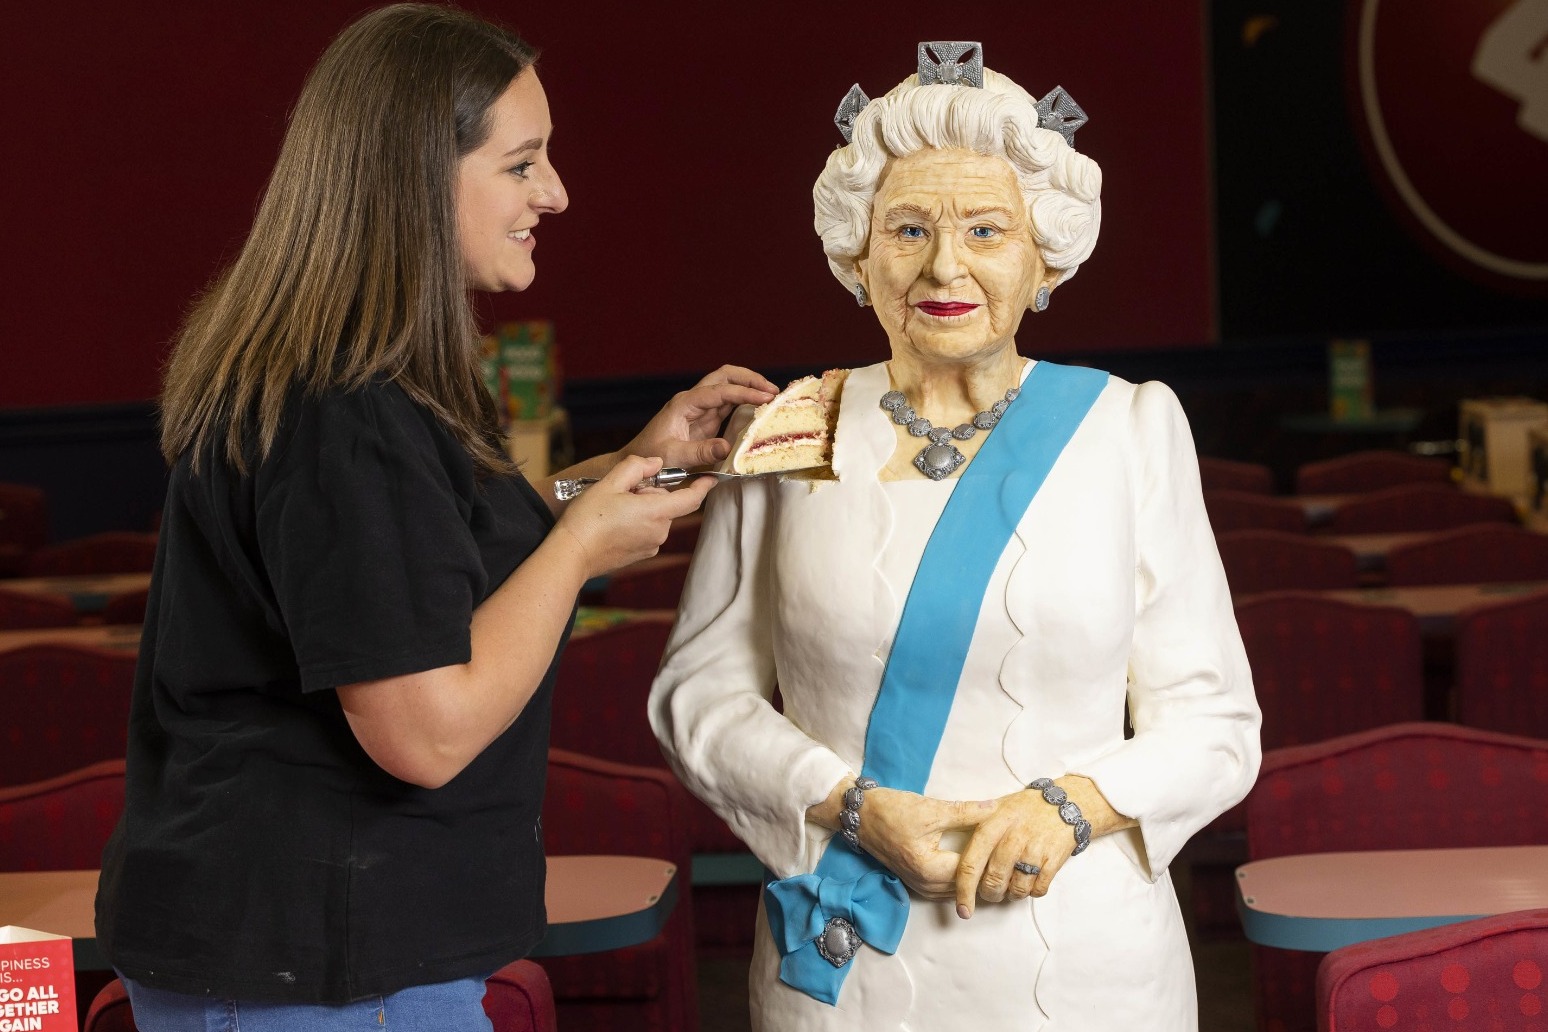 Life-sized Queen cake created for Platinum Jubilee celebration 